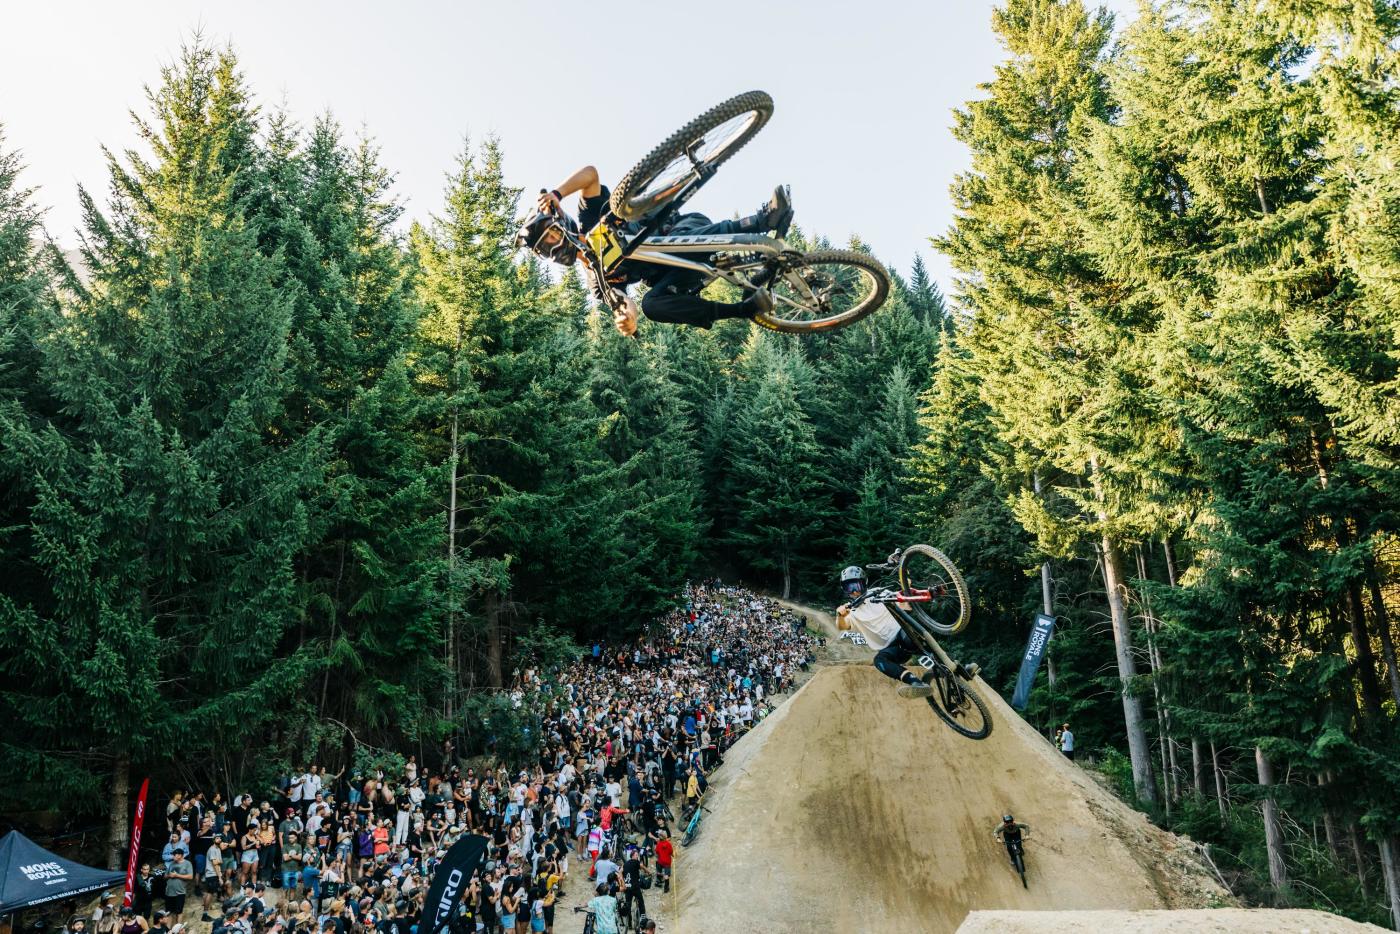 Two mountain bikers getting air over a big jump in front of a crowd at the Queenstown Bike Festival